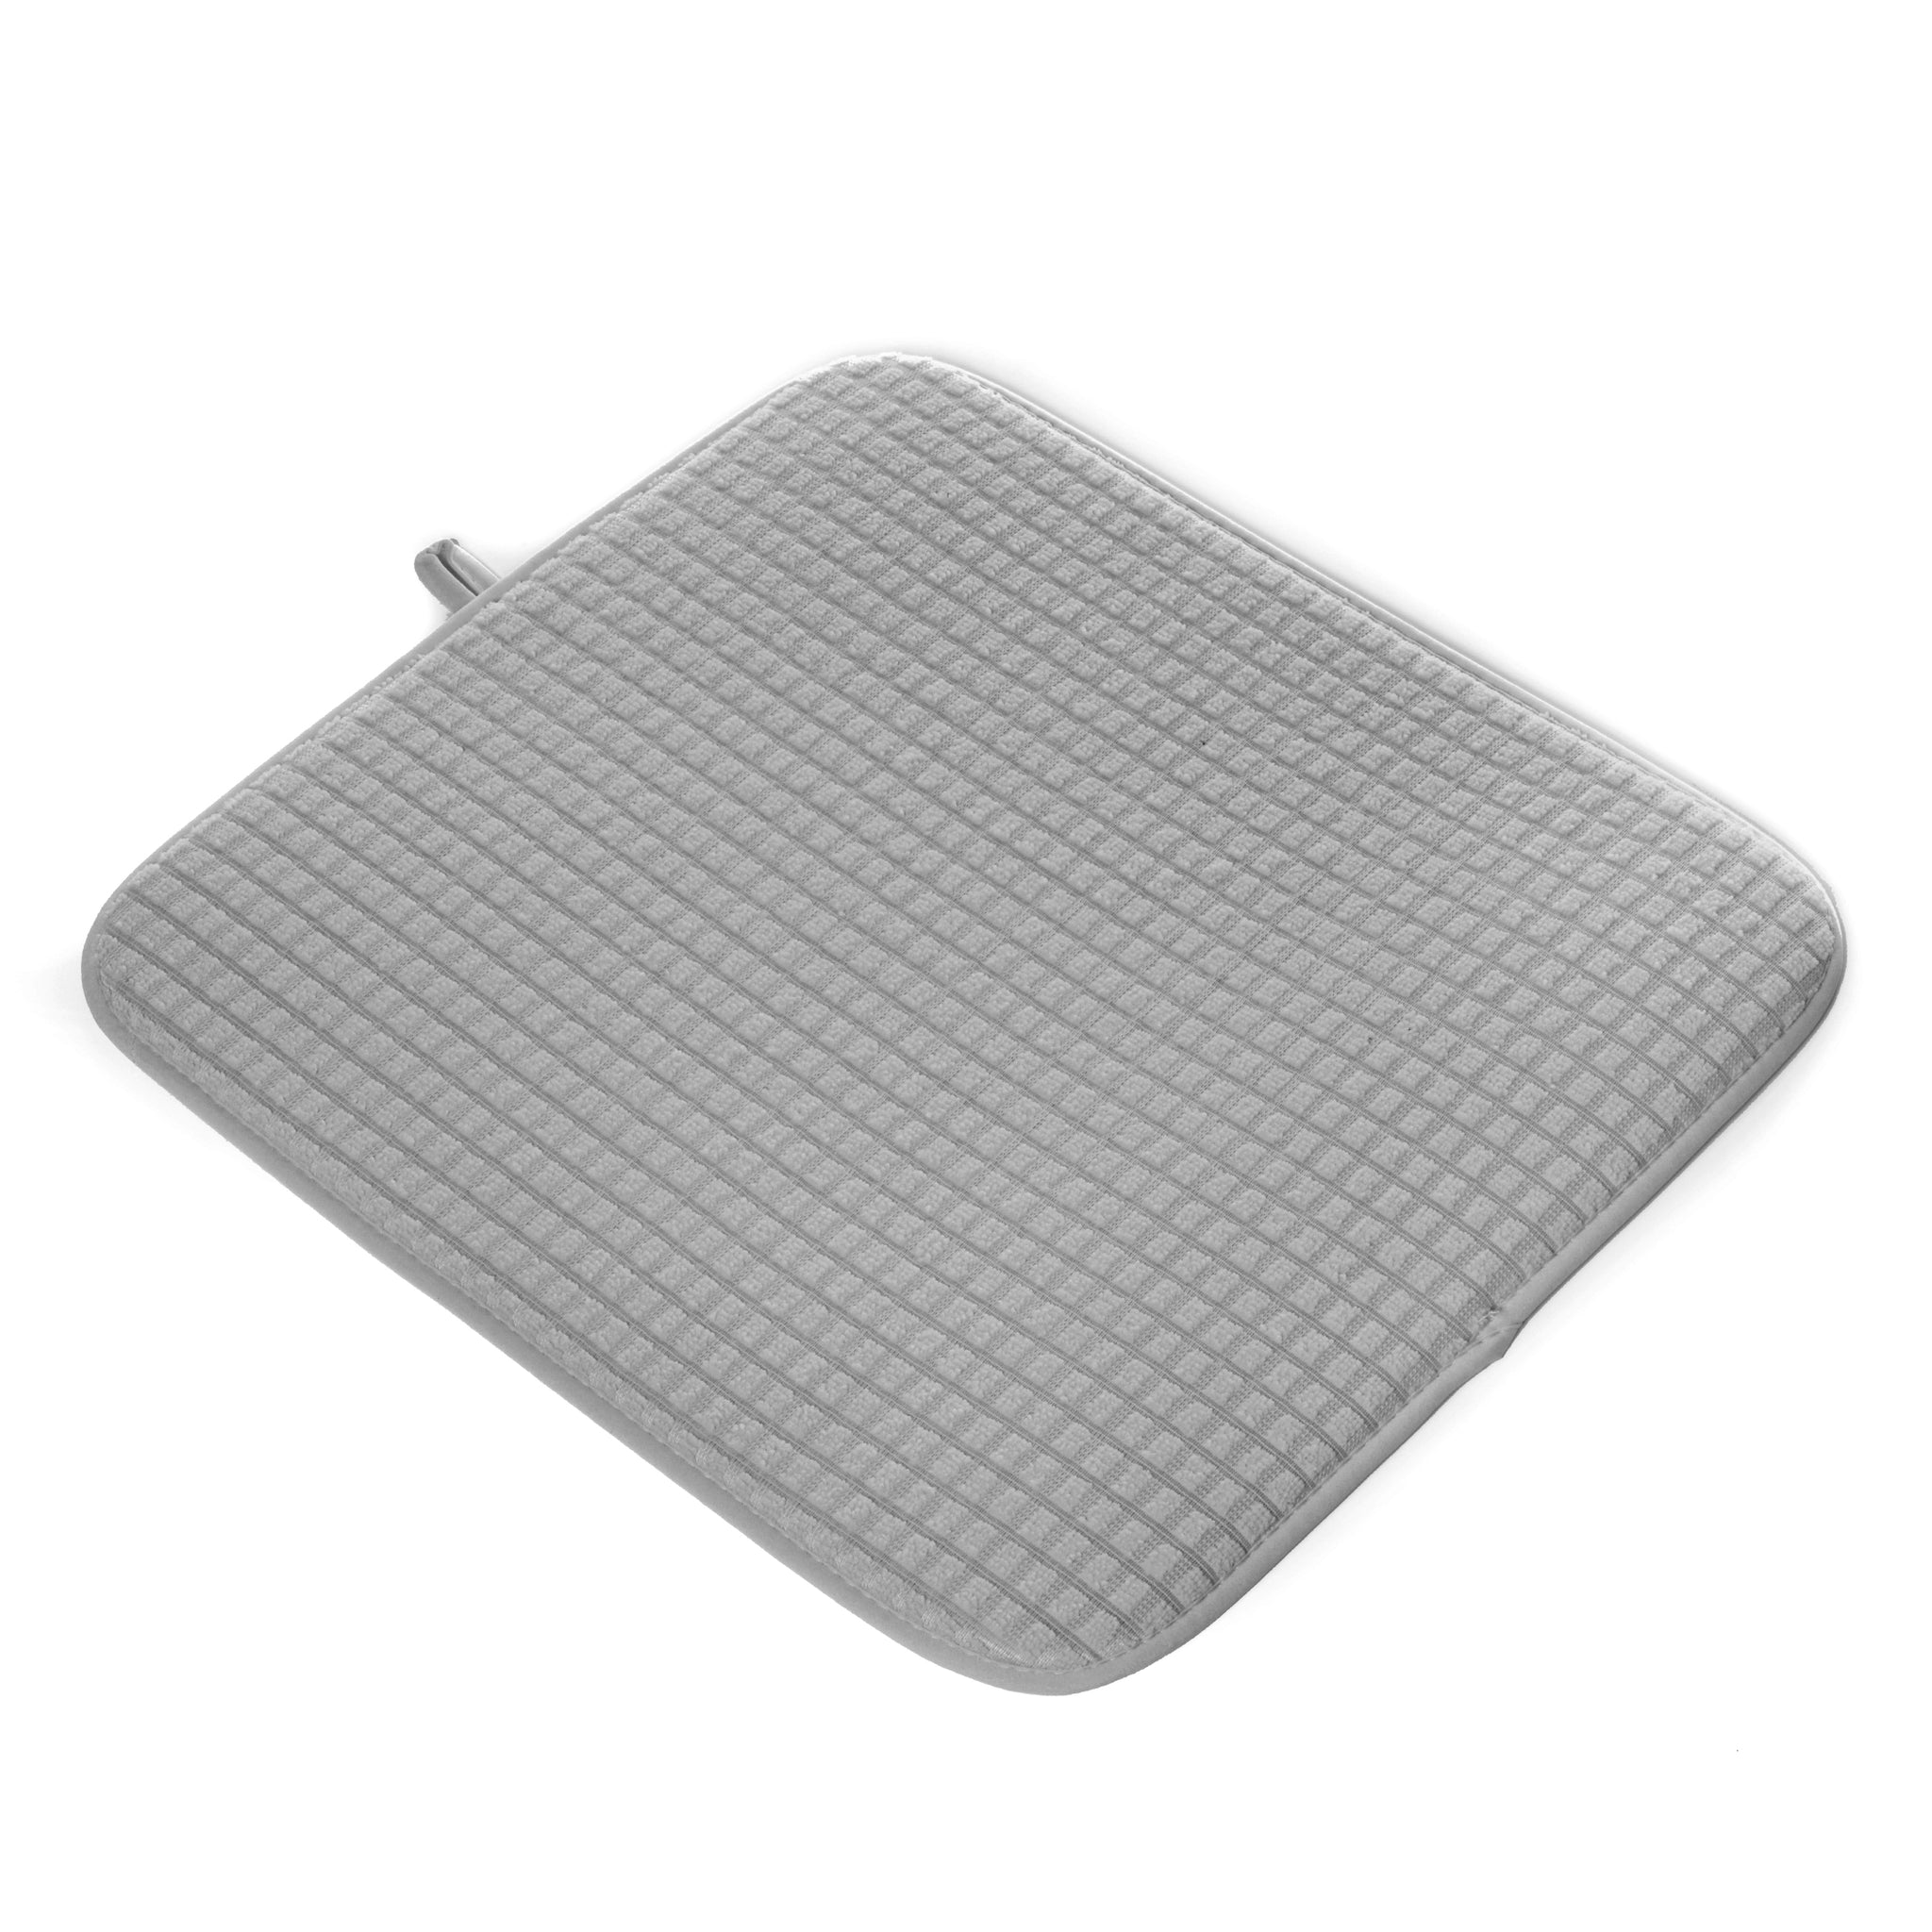 Con-Tact® Brand Kitchen Drying Mat – Con-Tact Brand